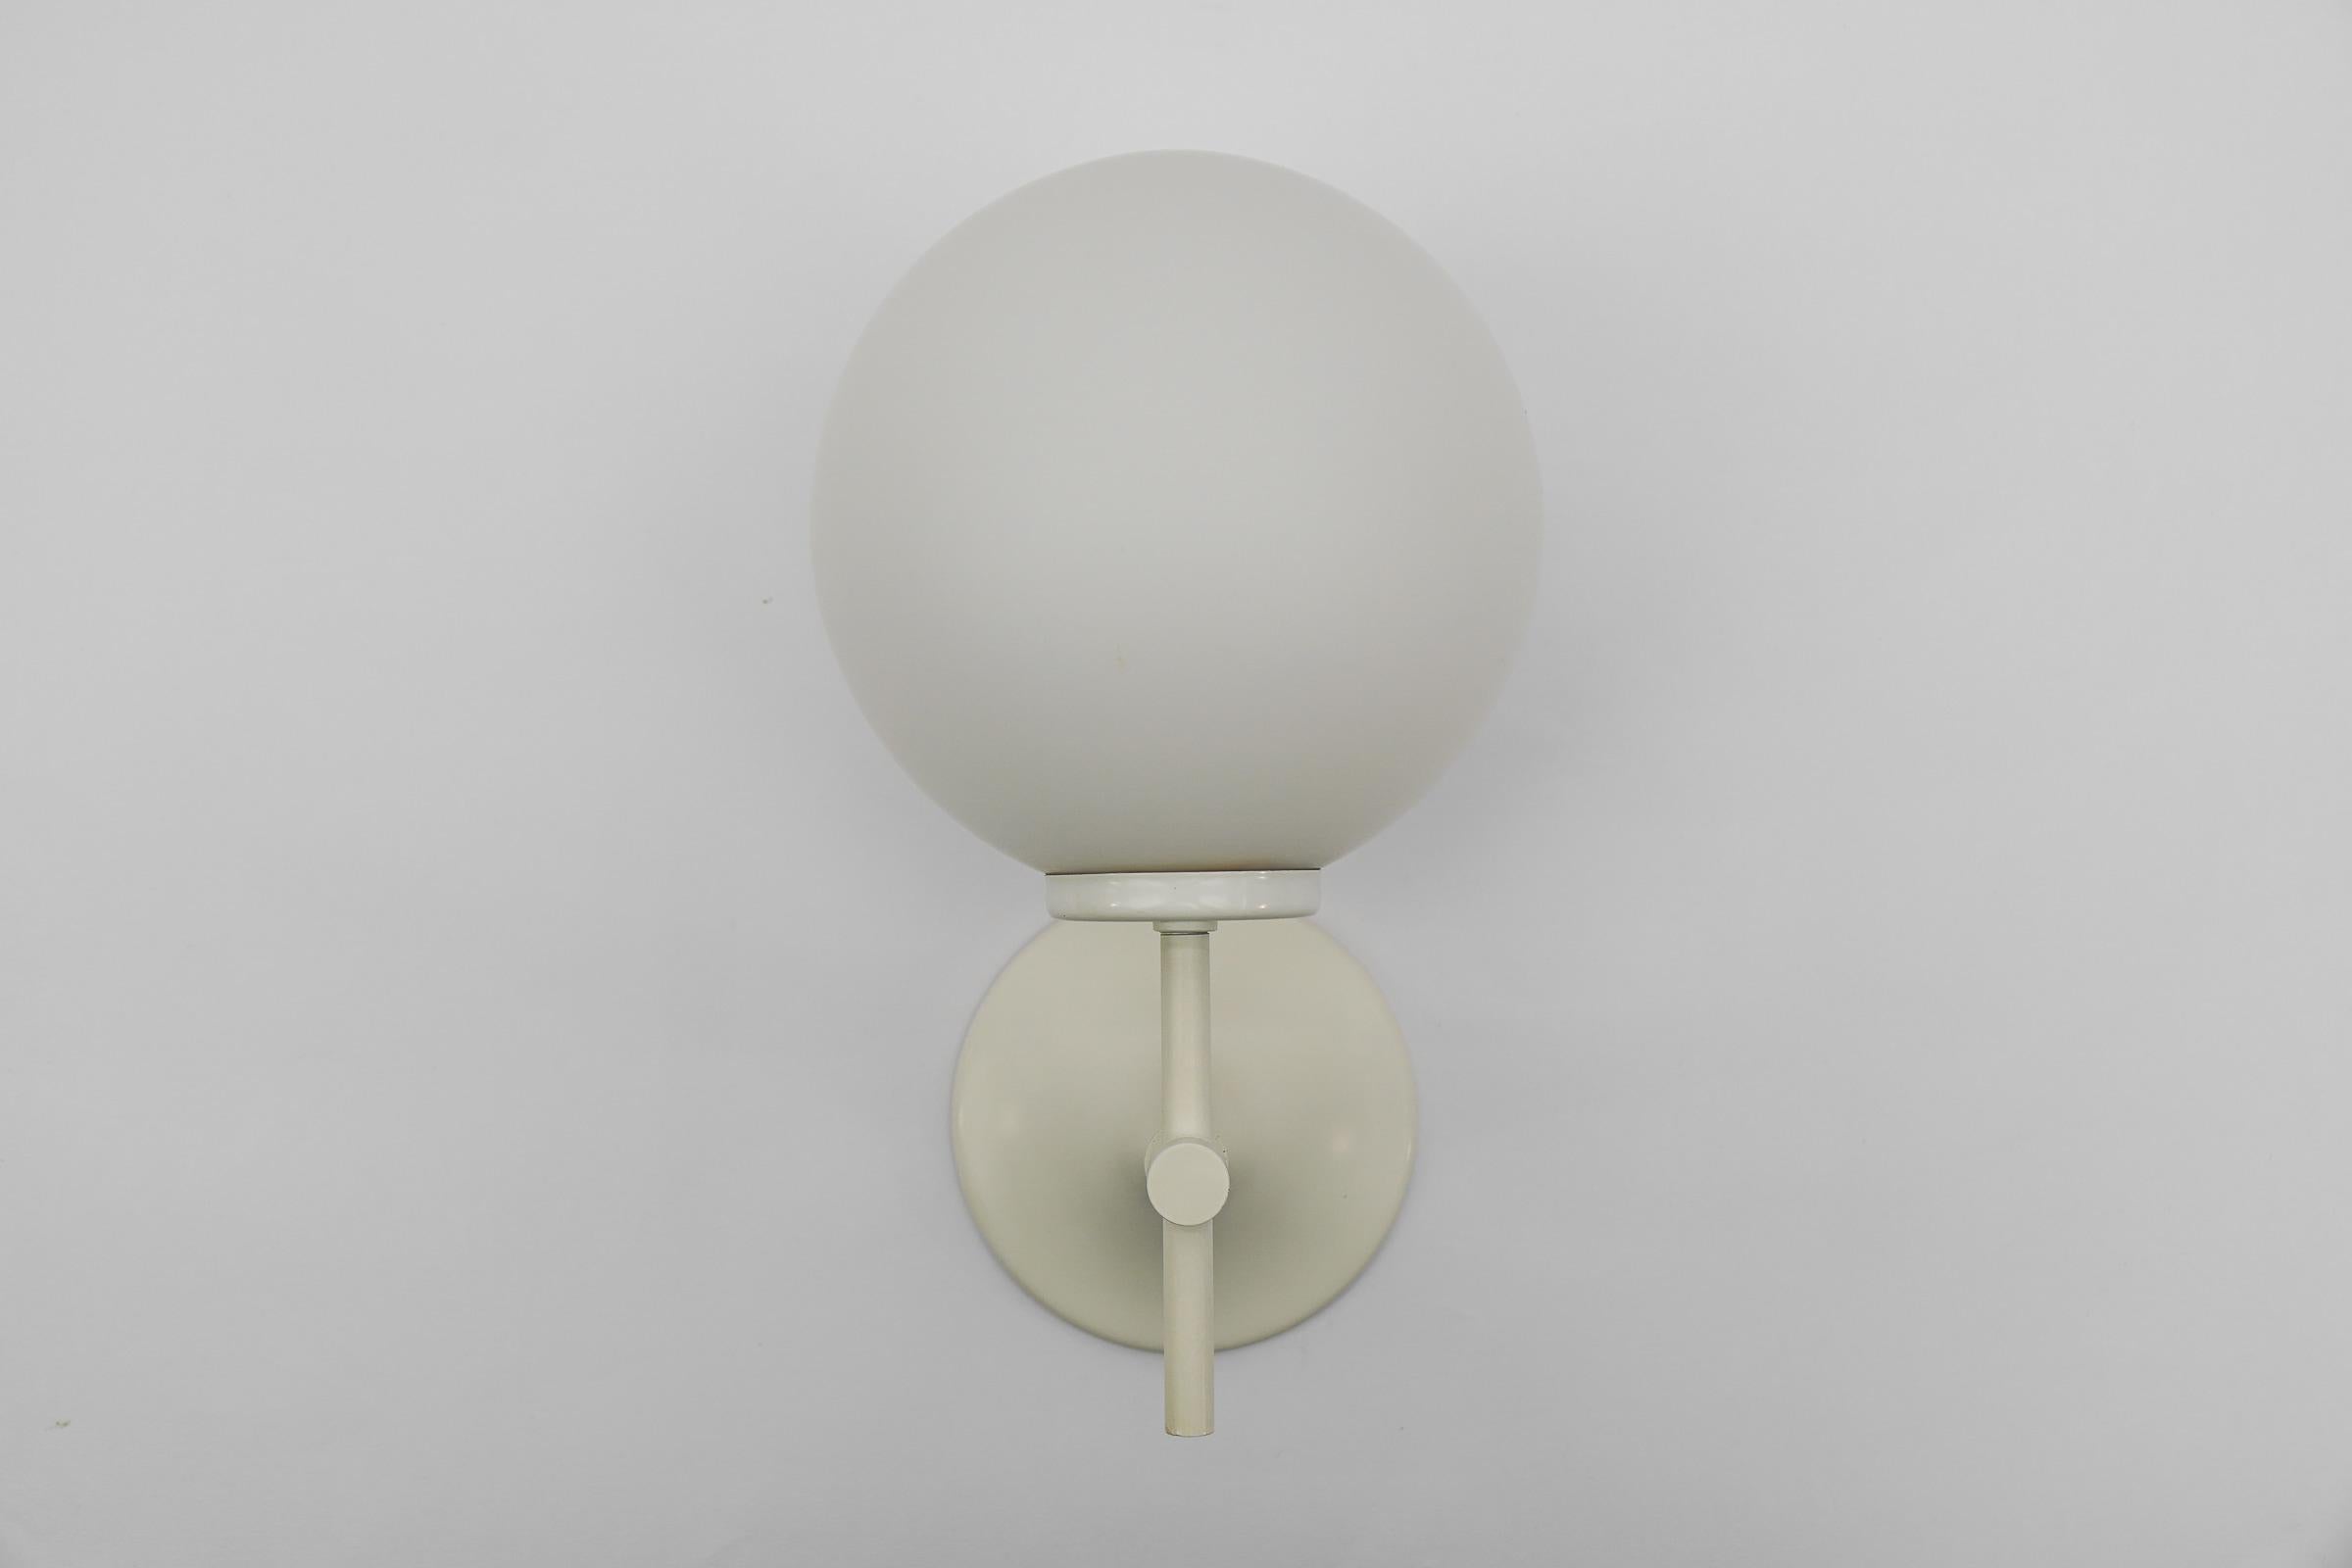 Rare Wall Light in White by Max Bill for Temde, Switzerland, 1960s For Sale 2